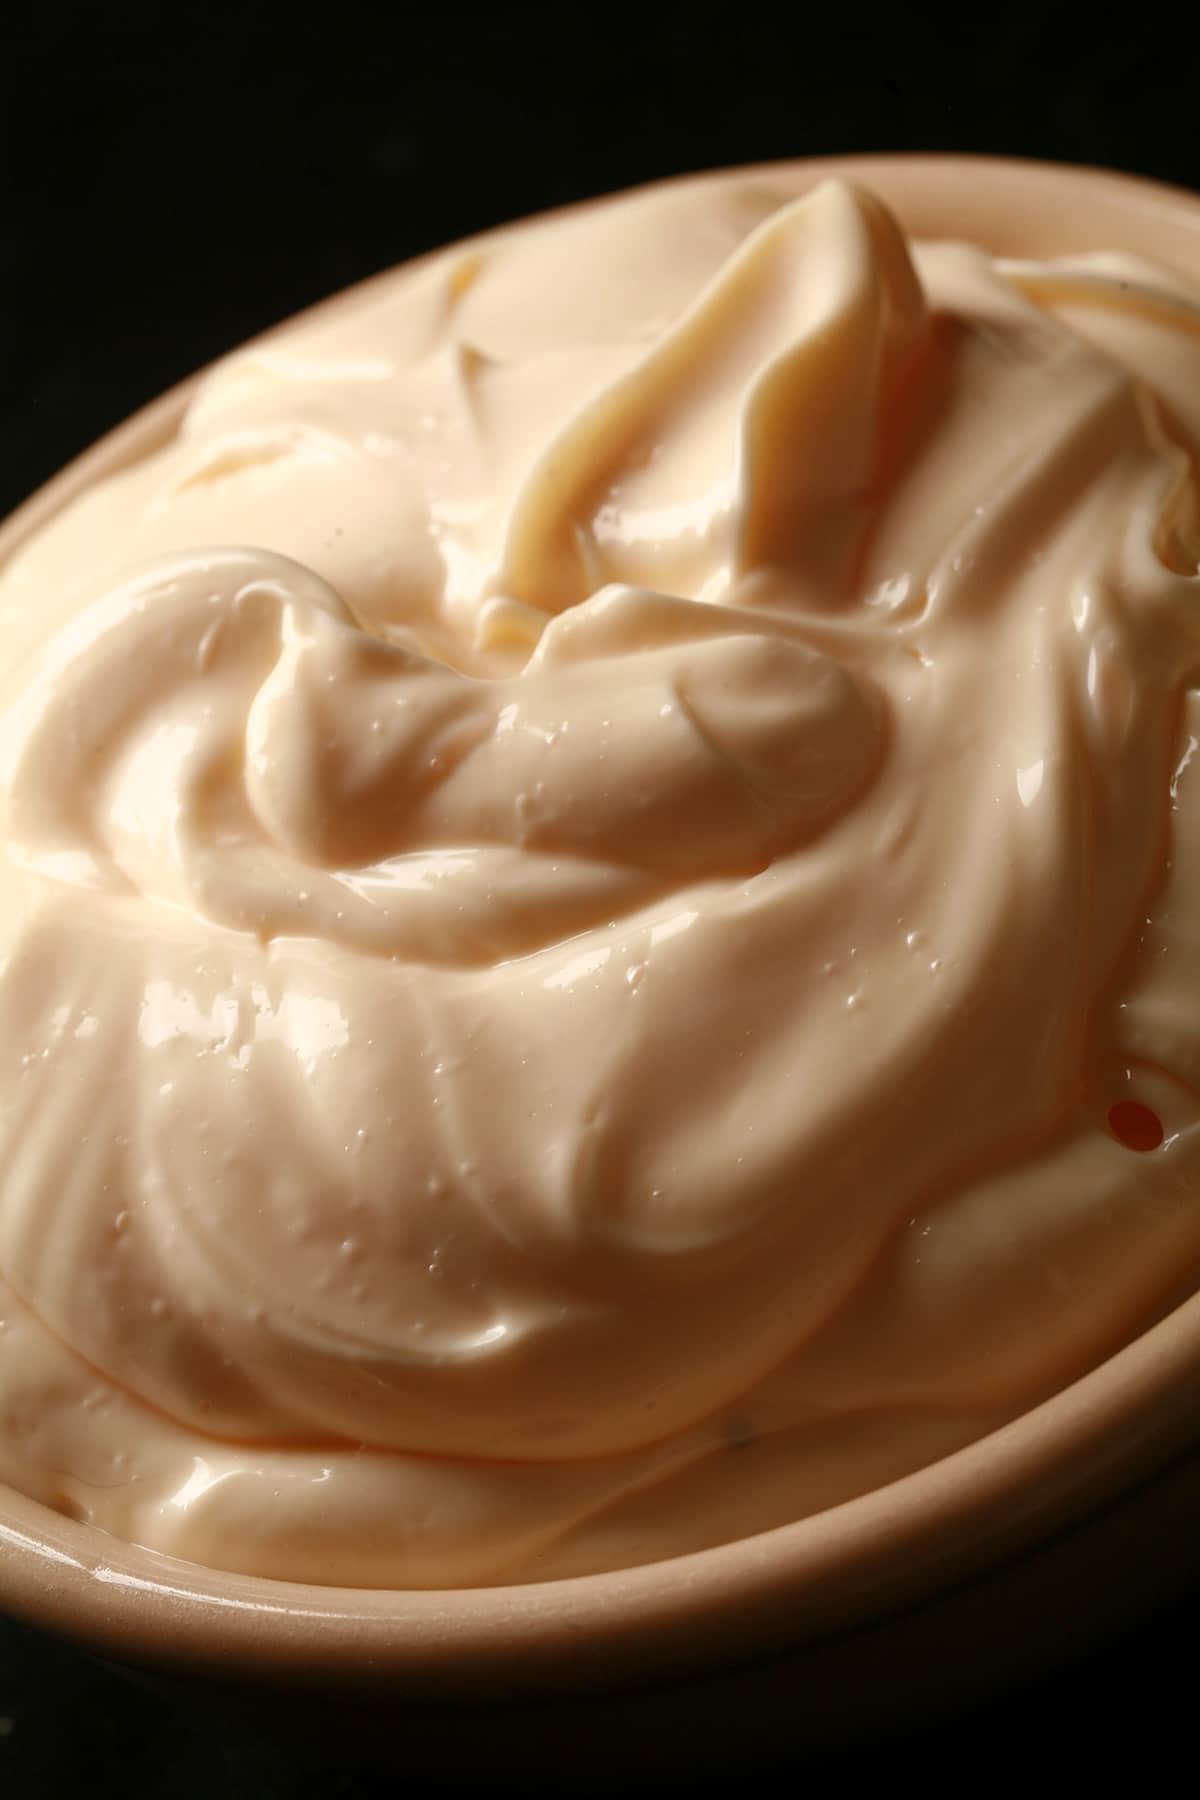 A close up view of a bowl of cold smoked mayo.